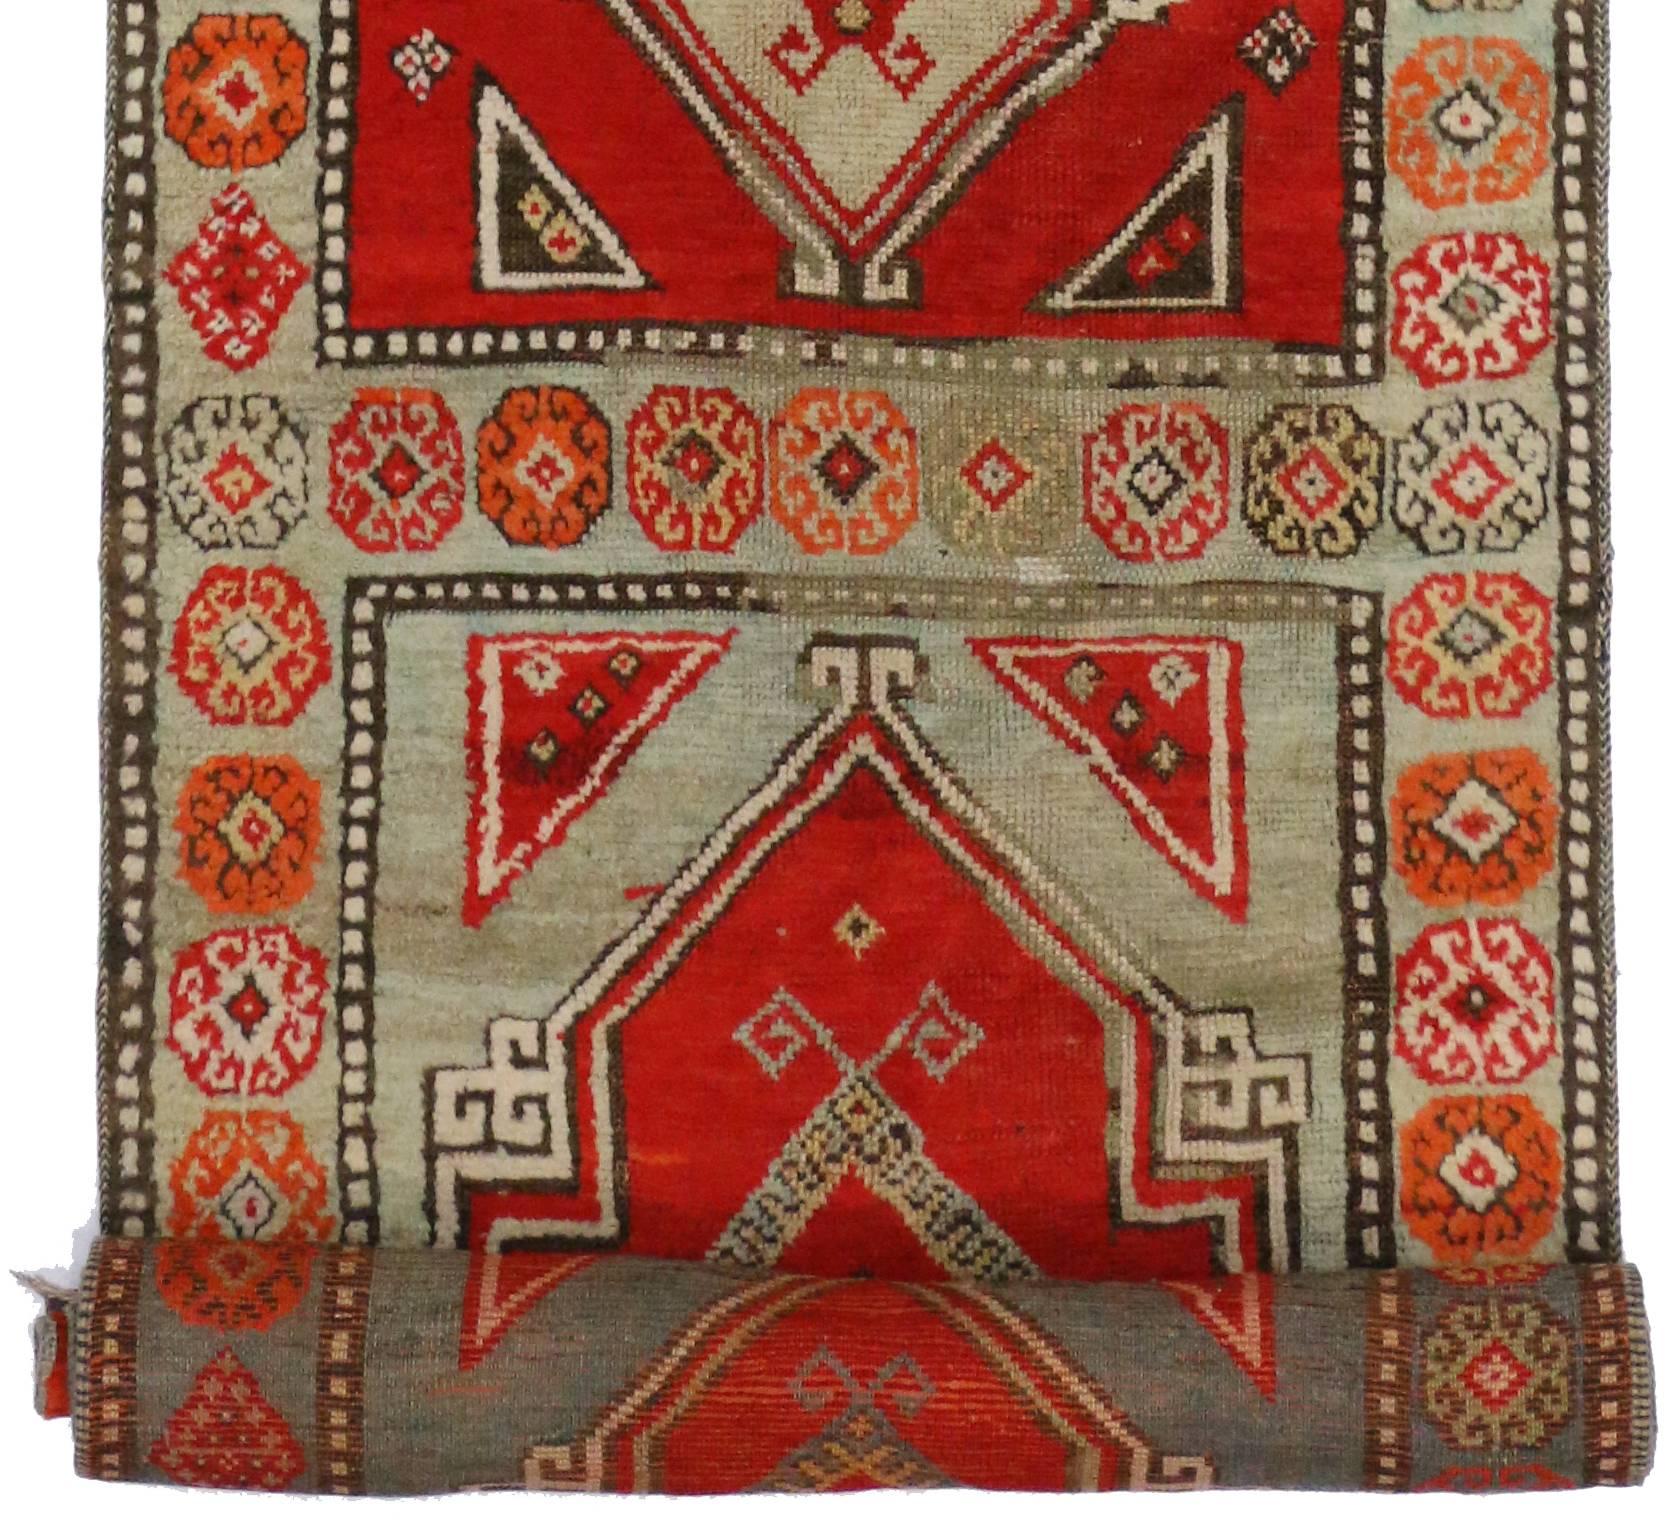 50444 Vintage Turkish Oushak Runner with Eclectic Mediterranean Style 02’10 x 14’09. With its timeless elegance and regal charm, this hand knotted wool vintage Turkish Oushak is well-balanced and dignified with bespoke style. The field highlights a